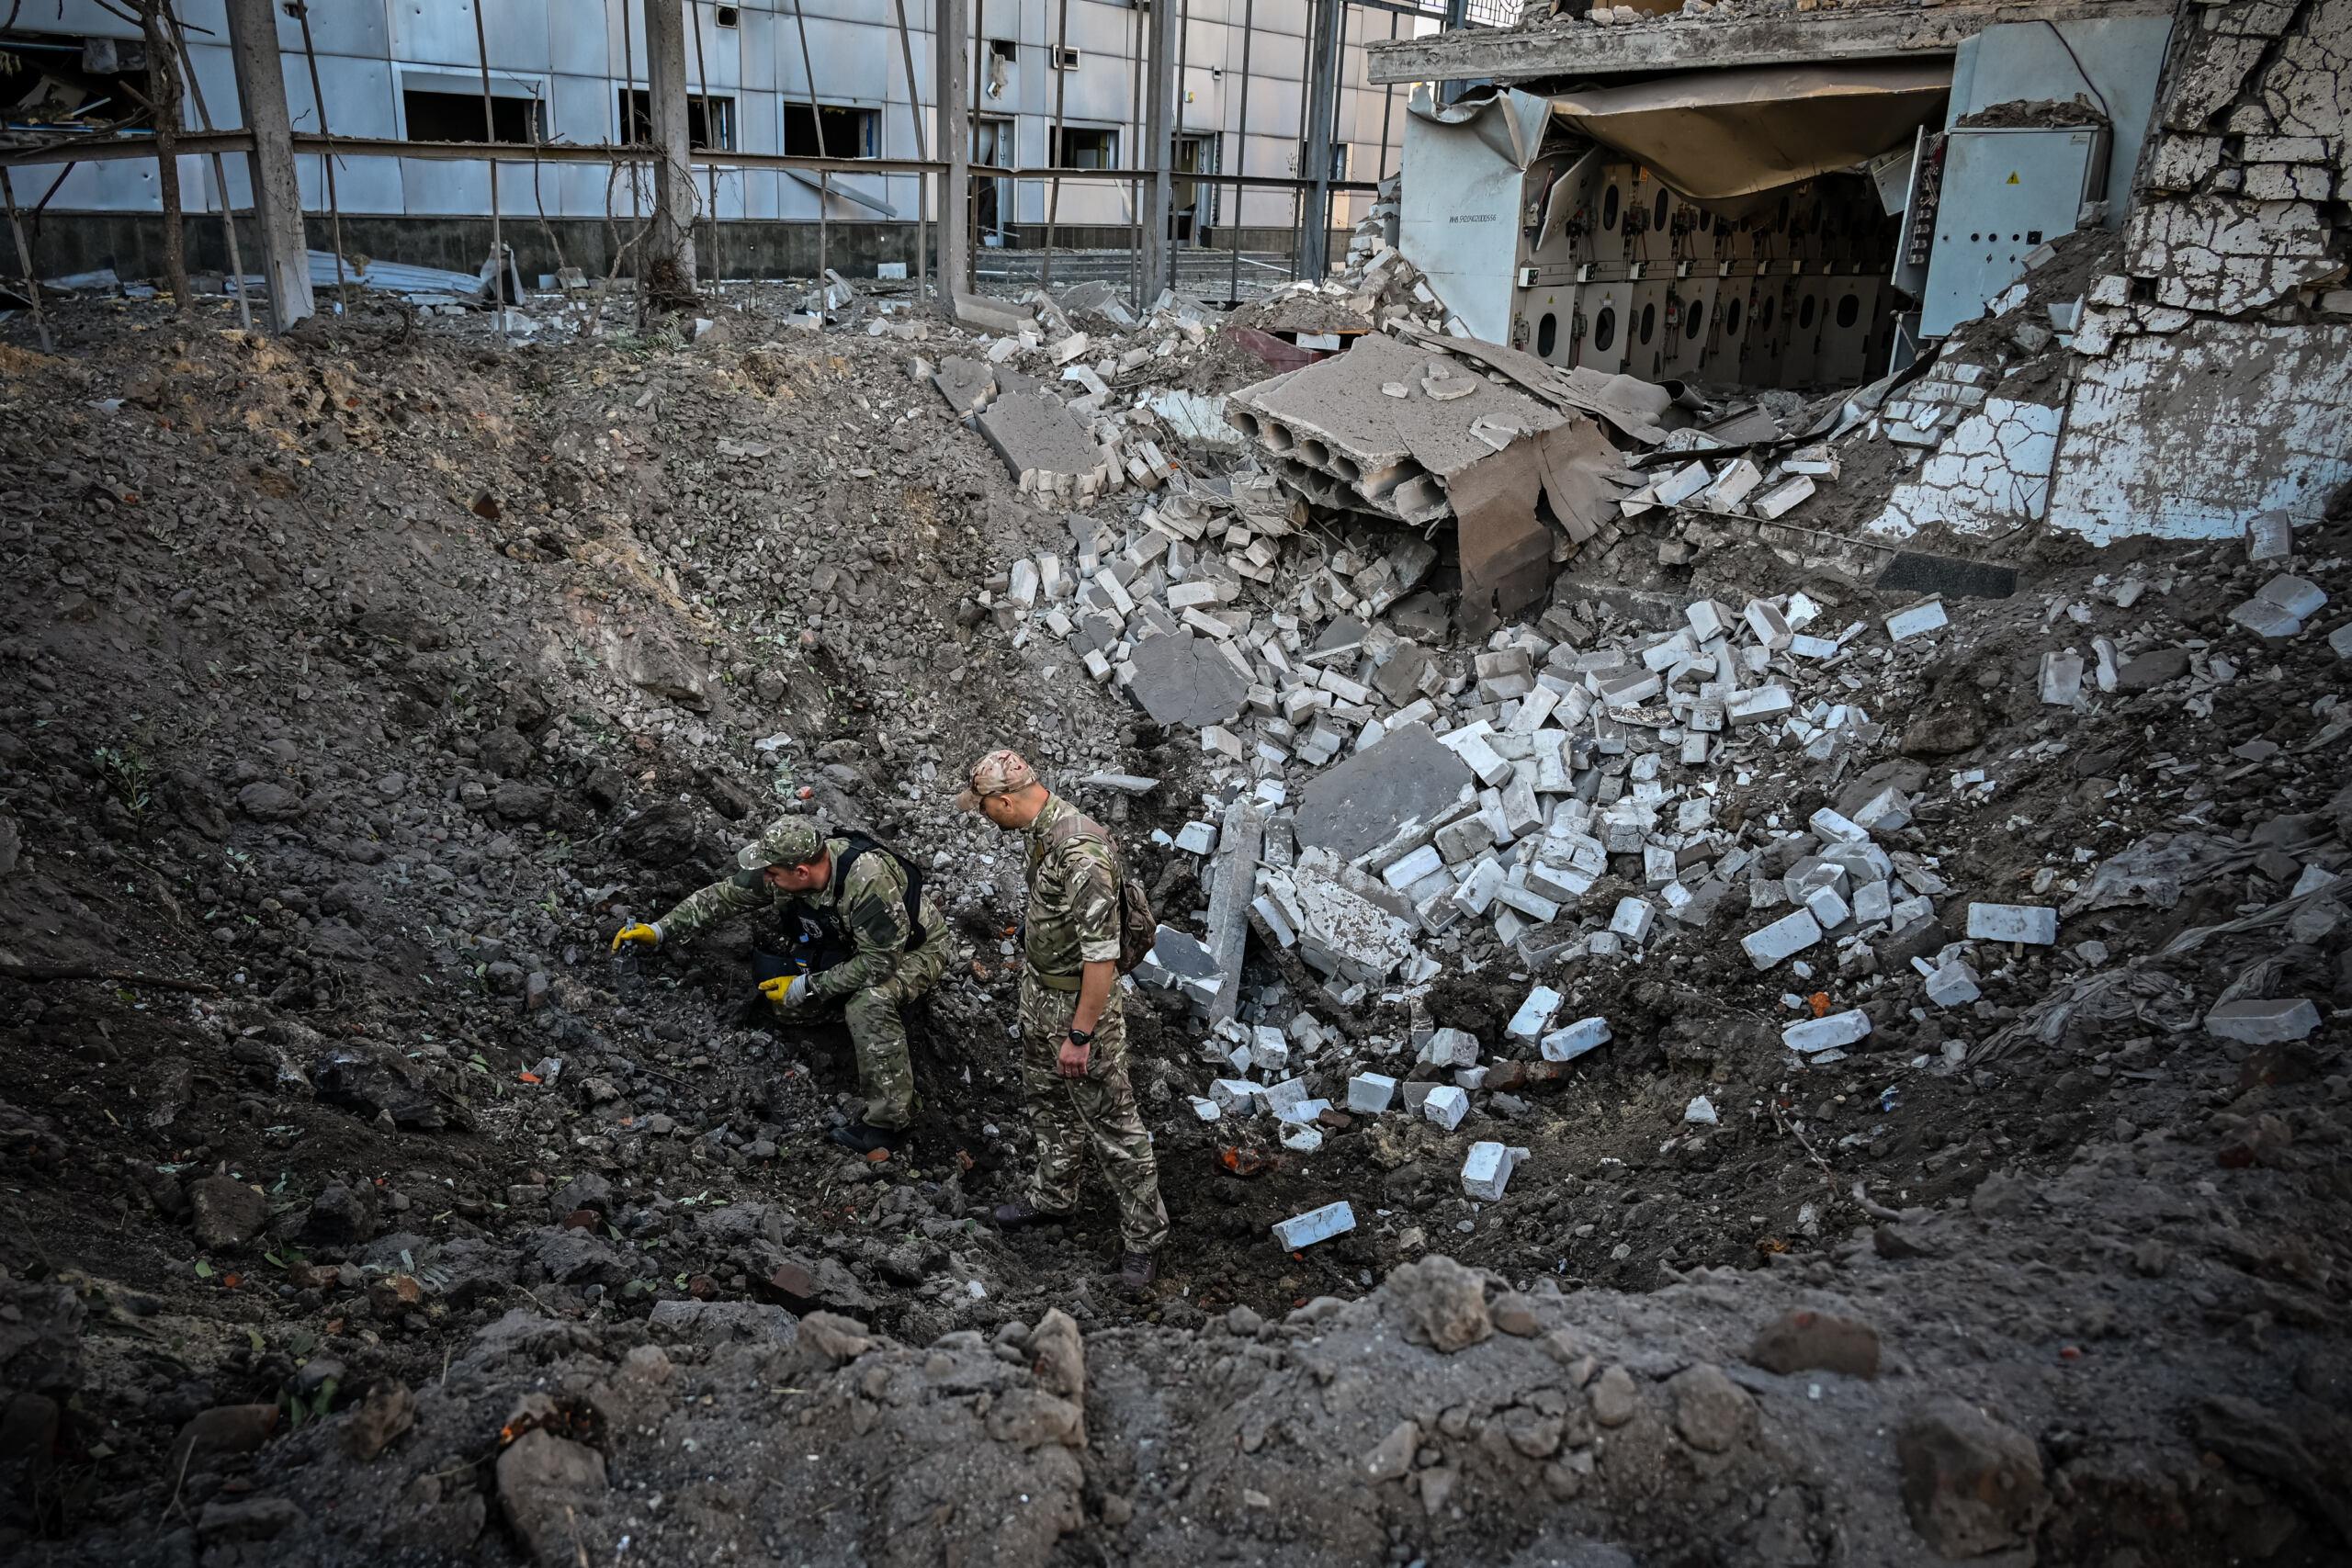 Ukrainian servicemen examine a crater following a missile strike in centre of Kharkiv on September 2, 2022, amid the Russian invasion of Ukraine. (Photo by SERGEY BOBOK / AFP)